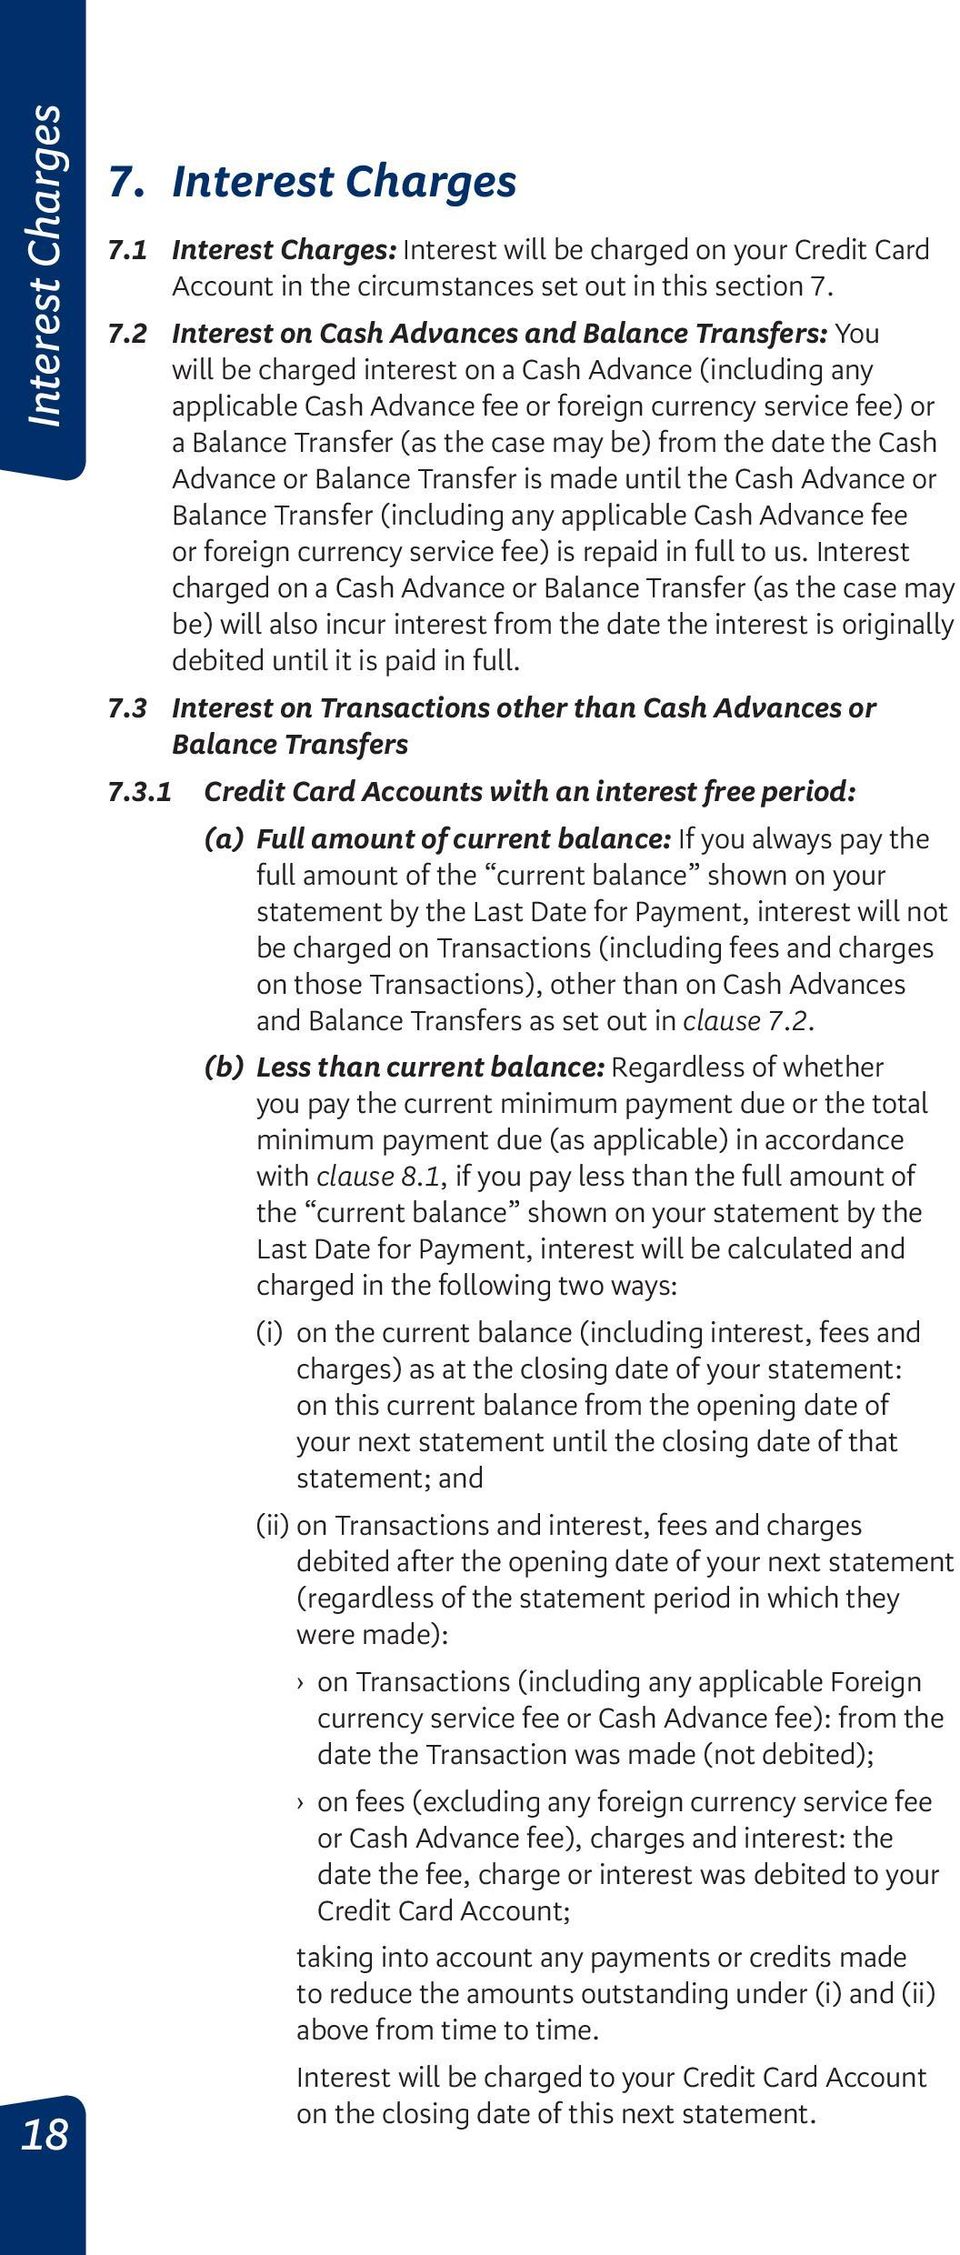 1 Interest Charges: Interest will be charged on your Credit Card Account in the circumstances set out in this section 7.